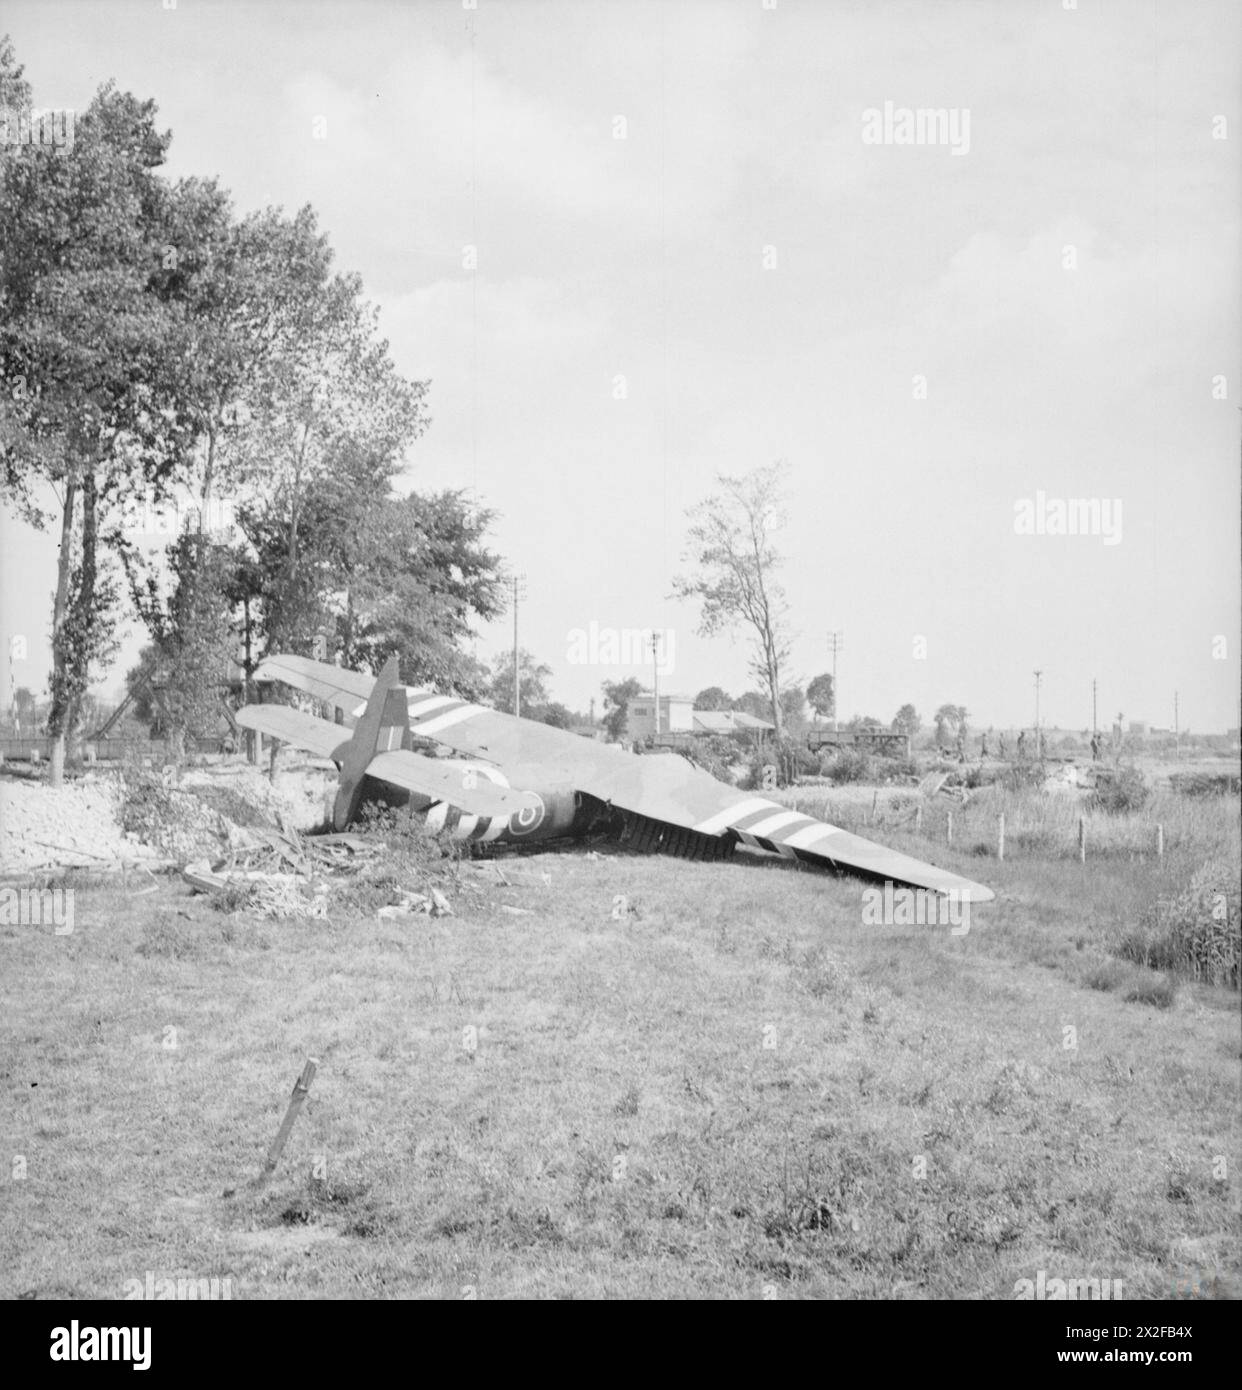 THE BRITISH ARMY IN THE NORMANDY CAMPAIGN 1944 - A Horsa glider near the Caen Canal bridge ('Pegasus Bridge') at Benouville, 10 June 1944, part of 6th Airborne Division's 'coup de main' force, carrying men of 'D' and 'B' Company, 2nd Battalion Oxfordshire and Buckinghamshire Light Infantry, which captured the bridges over the Orne River and Caen Canal in the early hours of D-Day. This is glider No. 91, which carried the force commander, Major John Howard, and Lieutenant Den Brotheridge's platoon Stock Photo